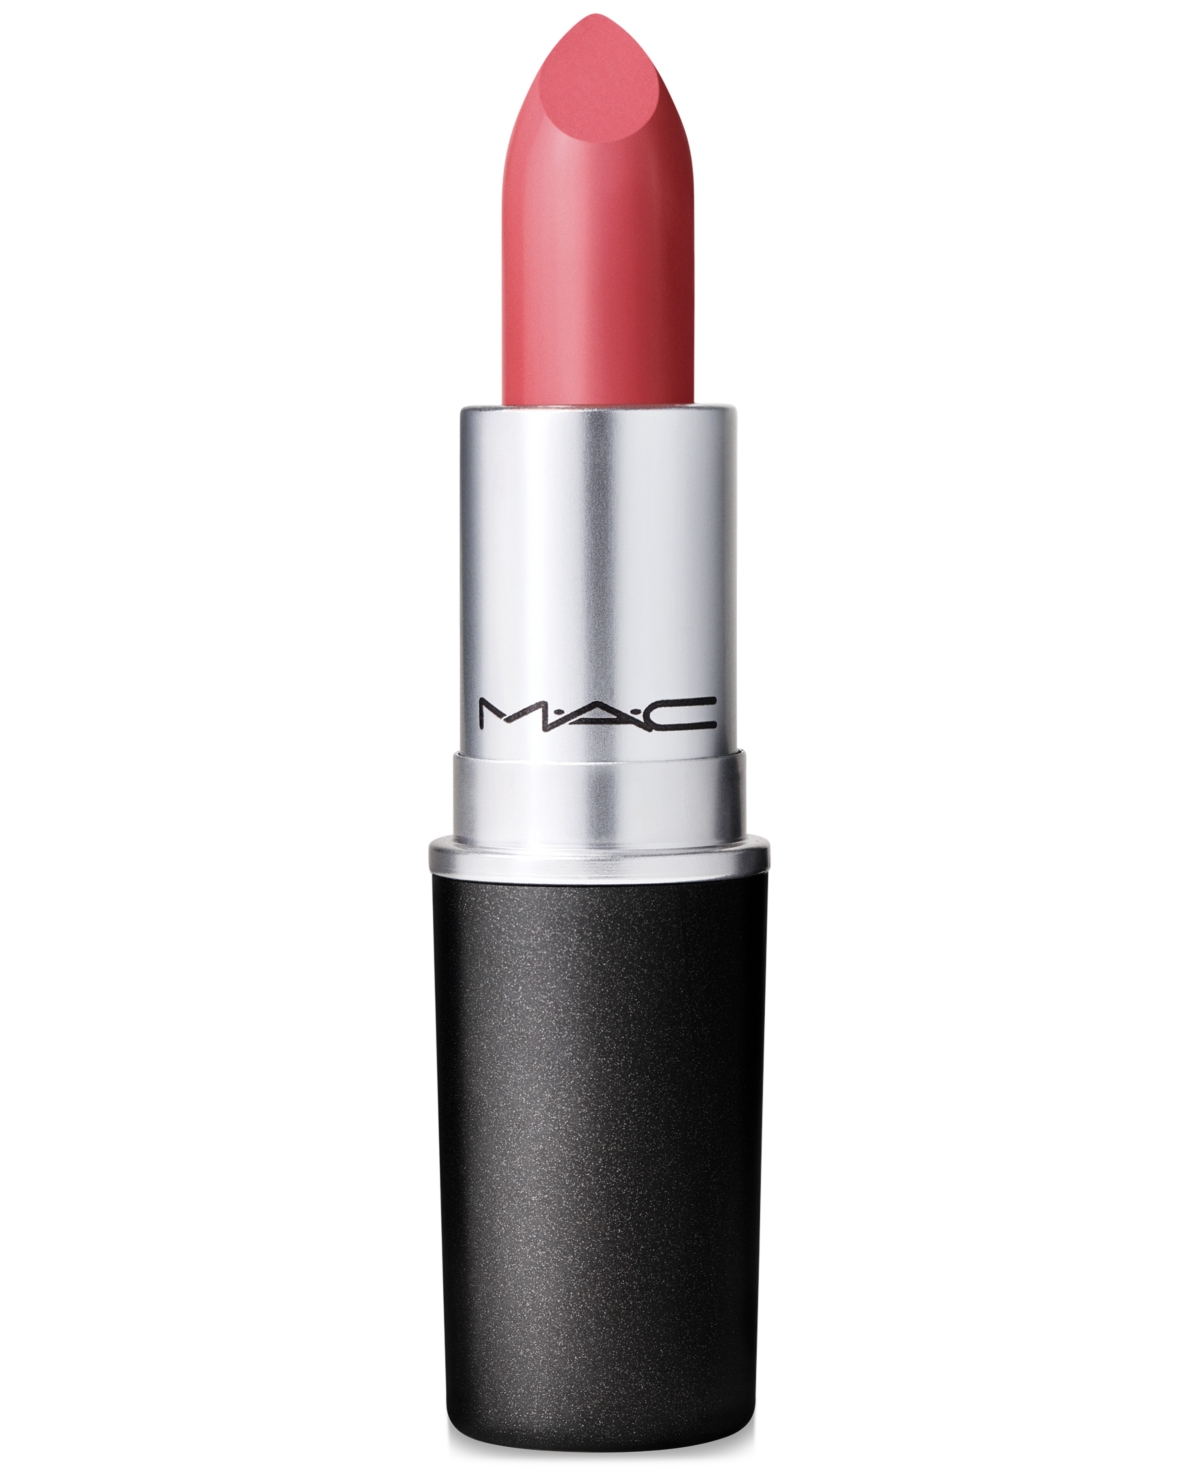 Mac Re-think Pink Amplified Lipstick In Just Curious (pinky Red)